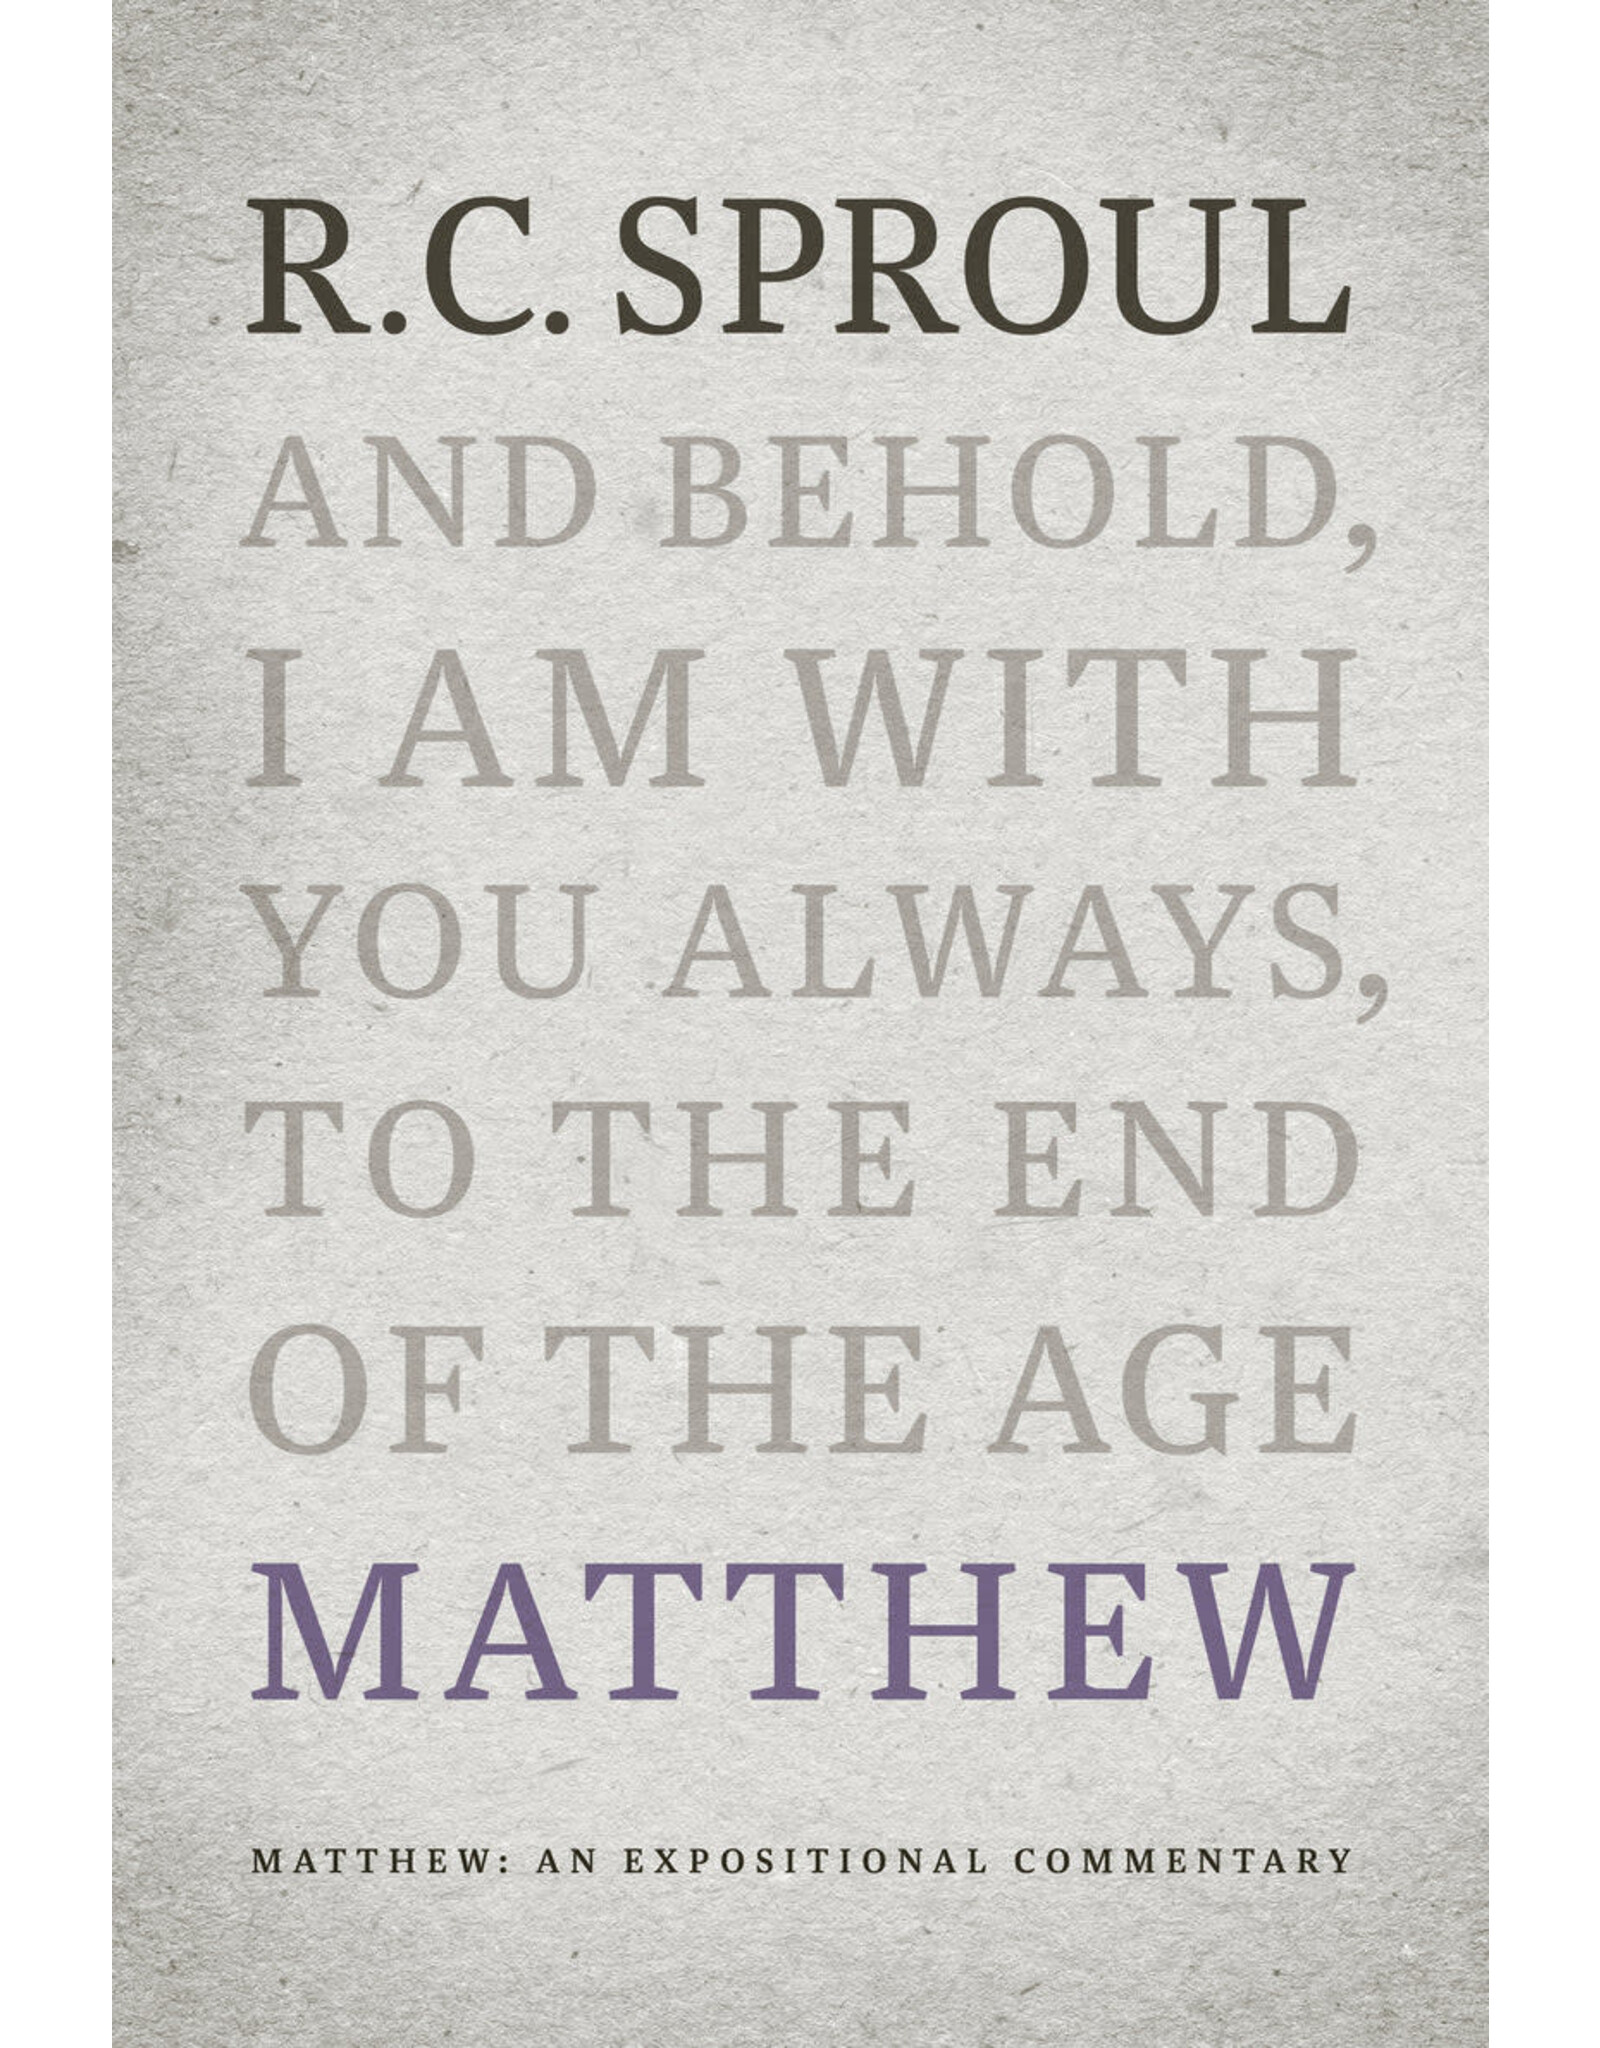 R C Sproul Matthew: An Expositional Commentary